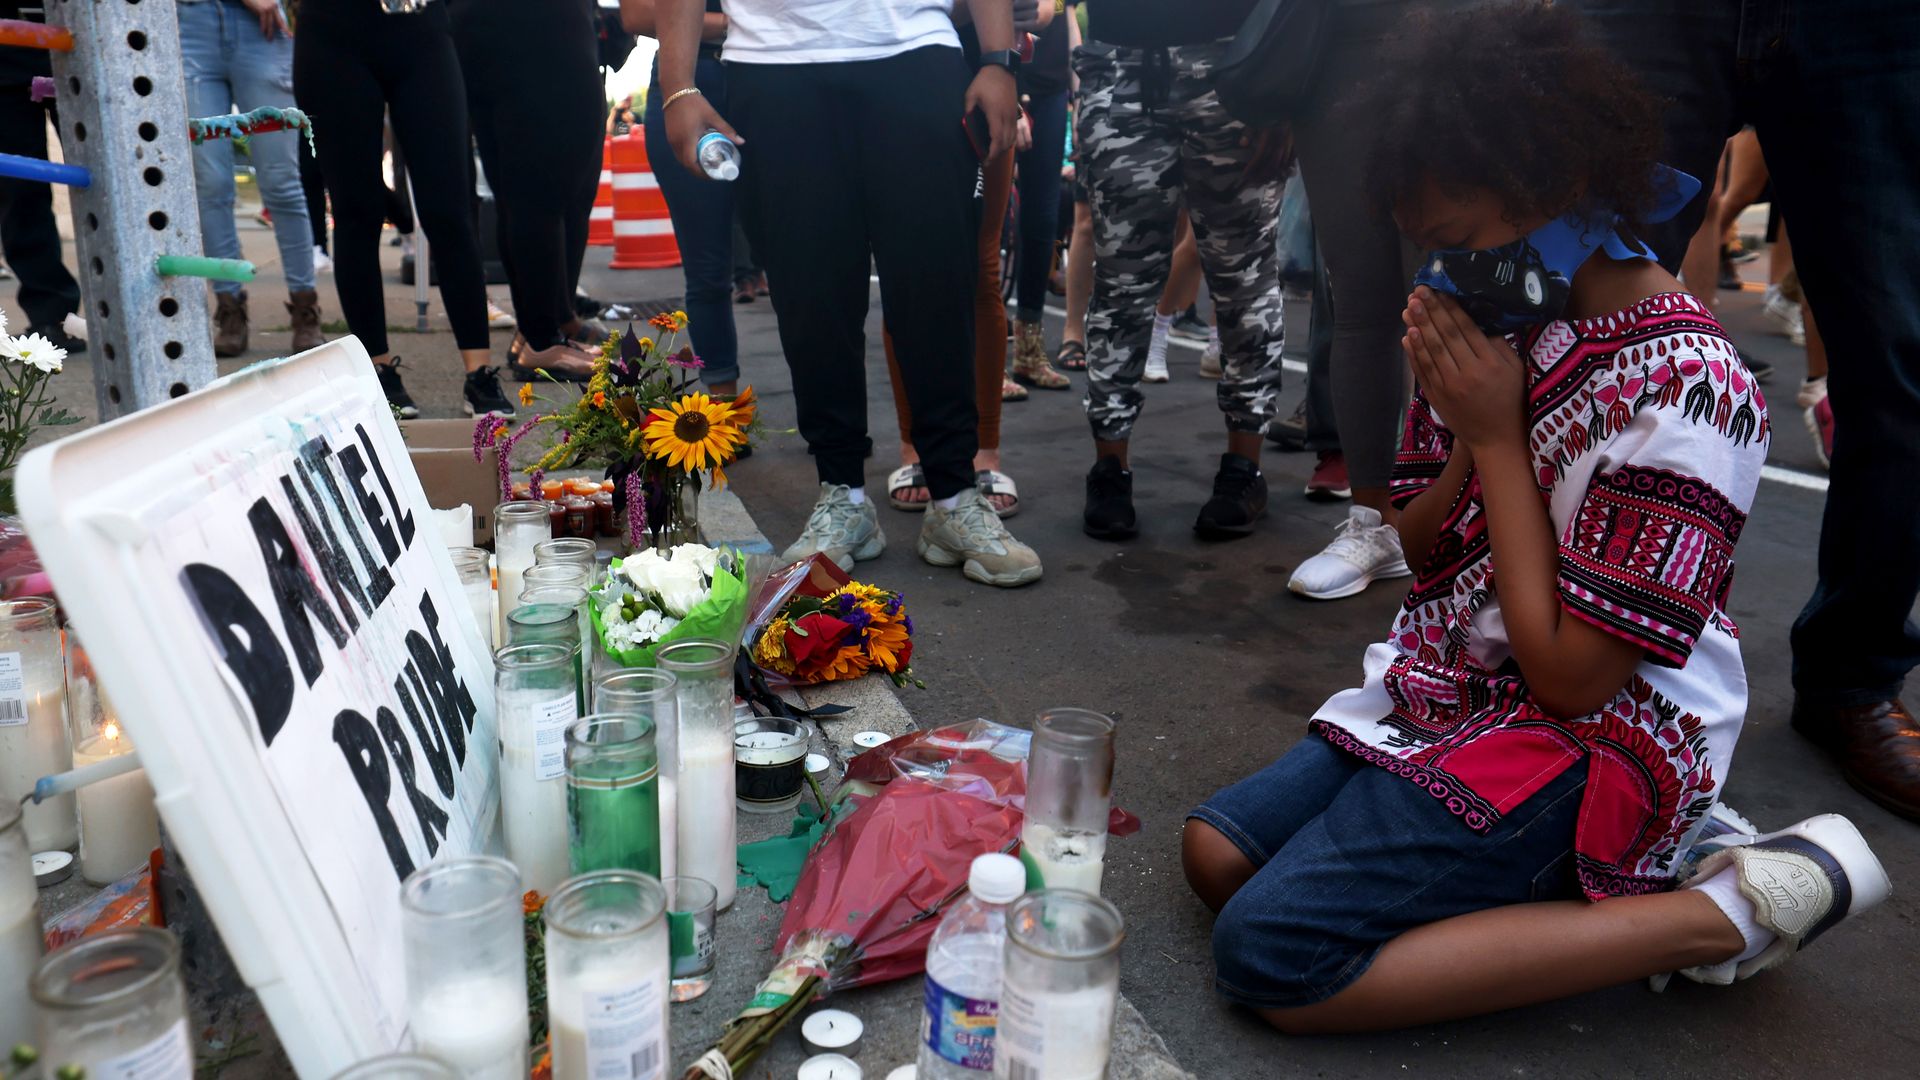 A child kneels in prayer at a make shift memorial at the site where Daniel Prude was arrested on September 03, 2020 in Rochester, New York. 